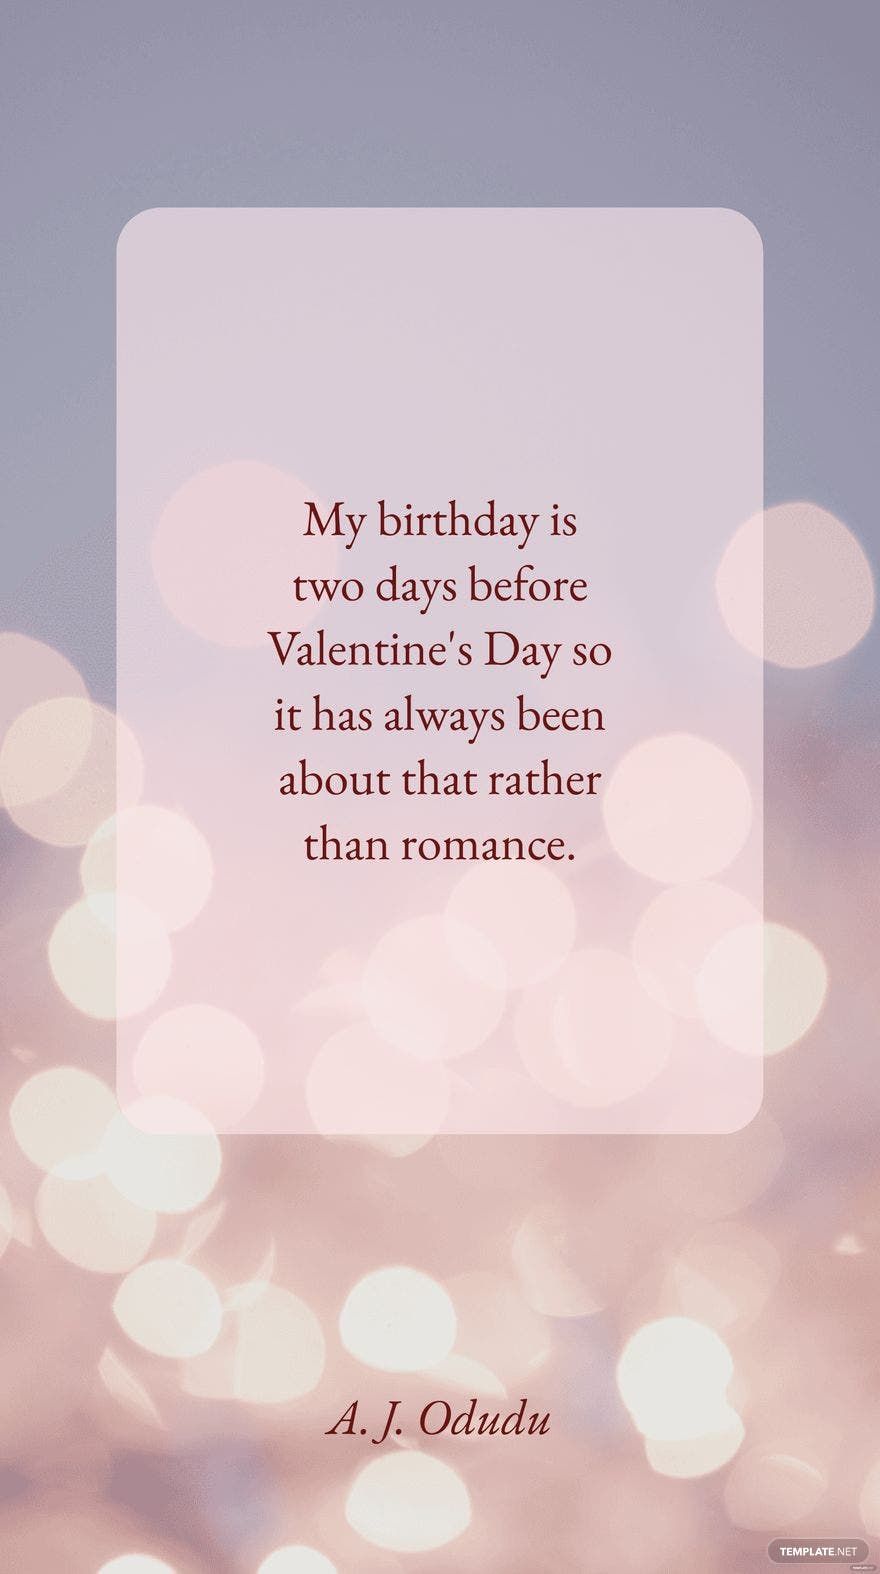 A. J. Odudu - My birthday is two days before Valentine's Day so it has always been about that rather than romance.